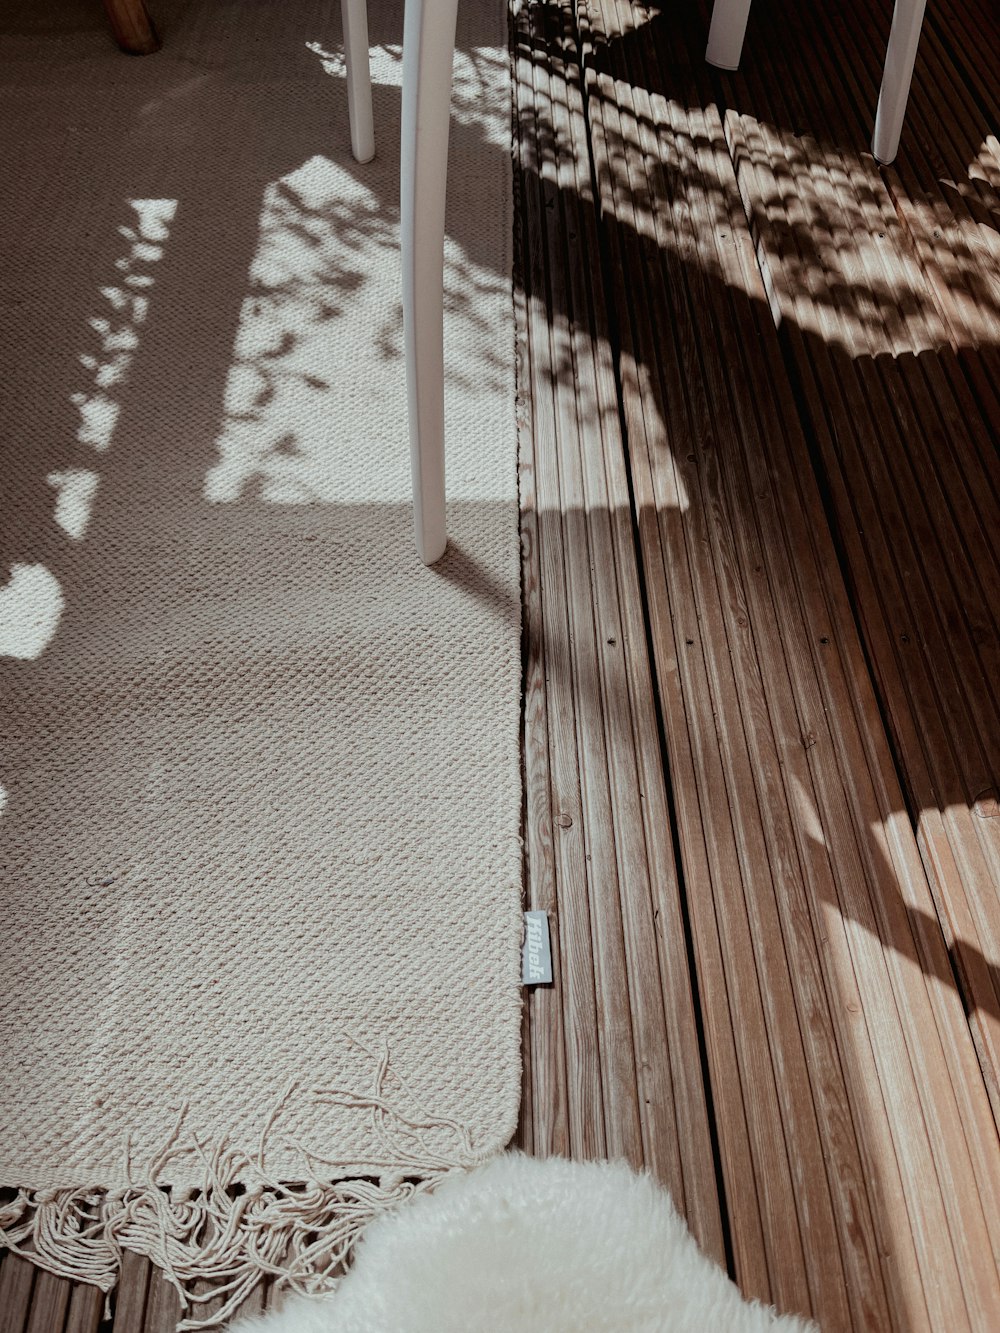 shadow of person on wooden floor